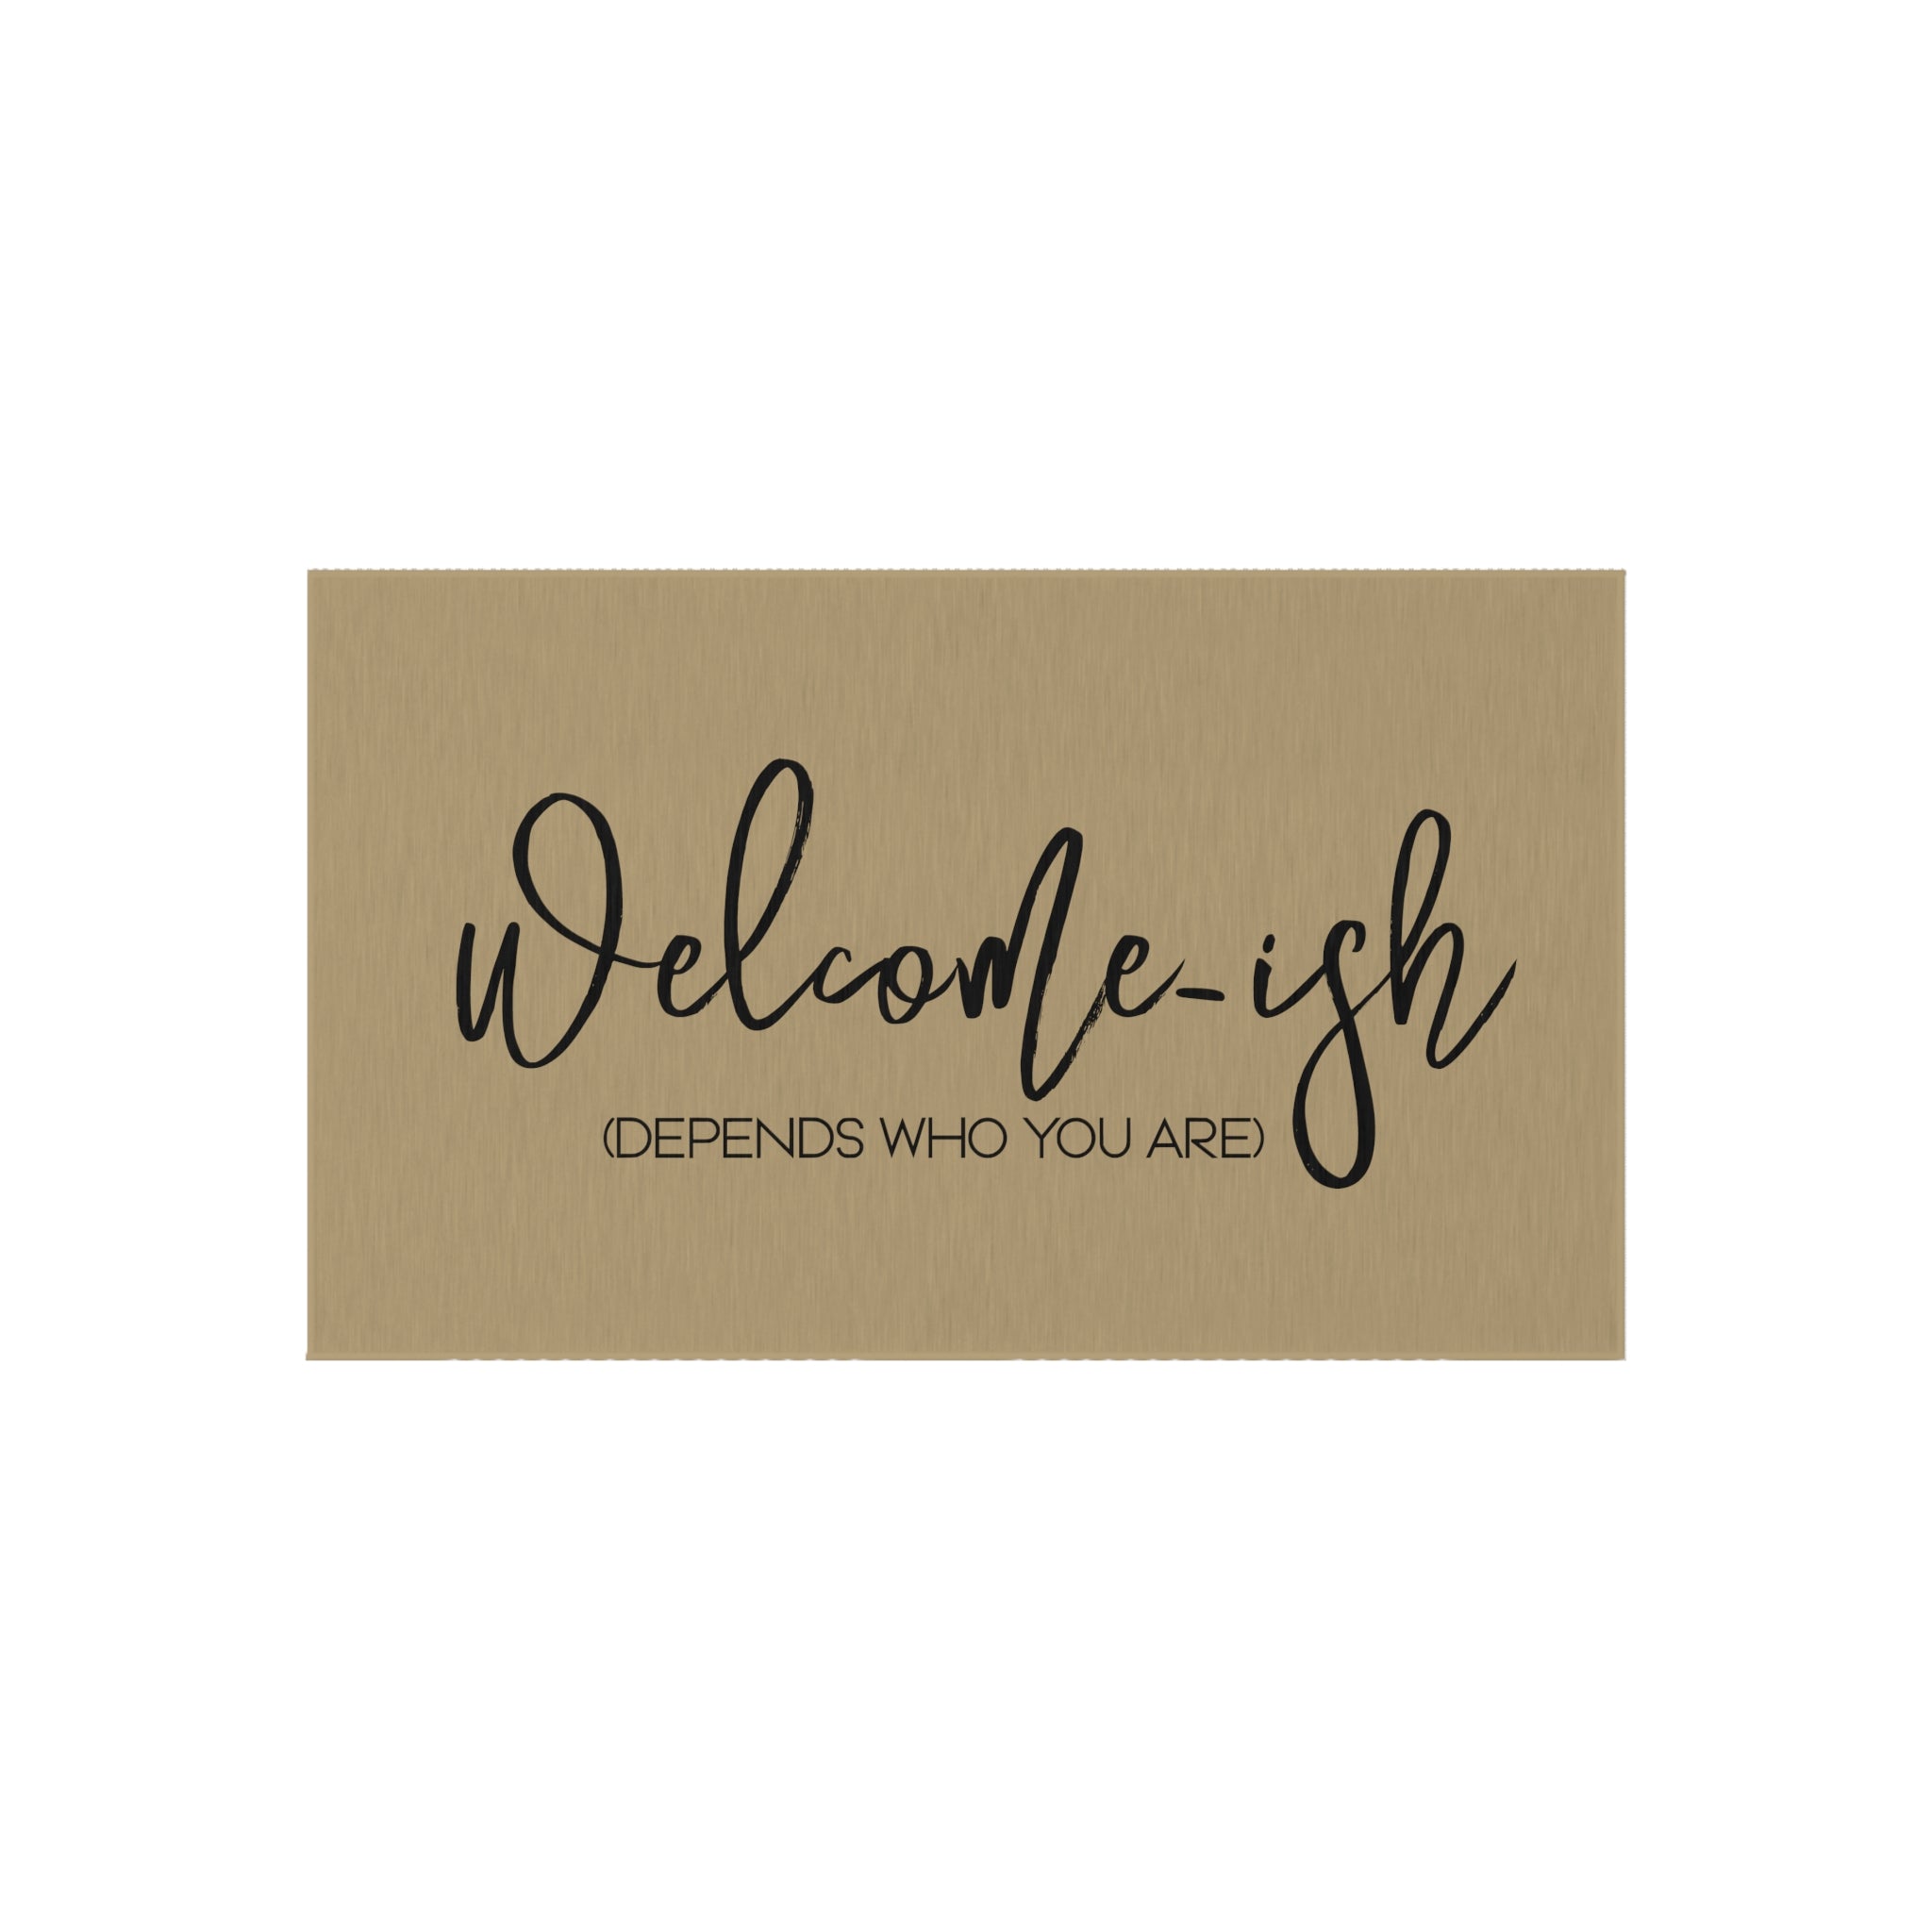 Welcome-ish (Depends who you are) Funny Sarcastic Welcome Mat, Outdoor Mat for Front Door, Housewarming Gift, Dornier RugWelcome-ish (Depends who you are) Funny Sarcastic Welcome Mat, Outdoor Mat for Front Door, Housewarming Gift, Dornier Rug